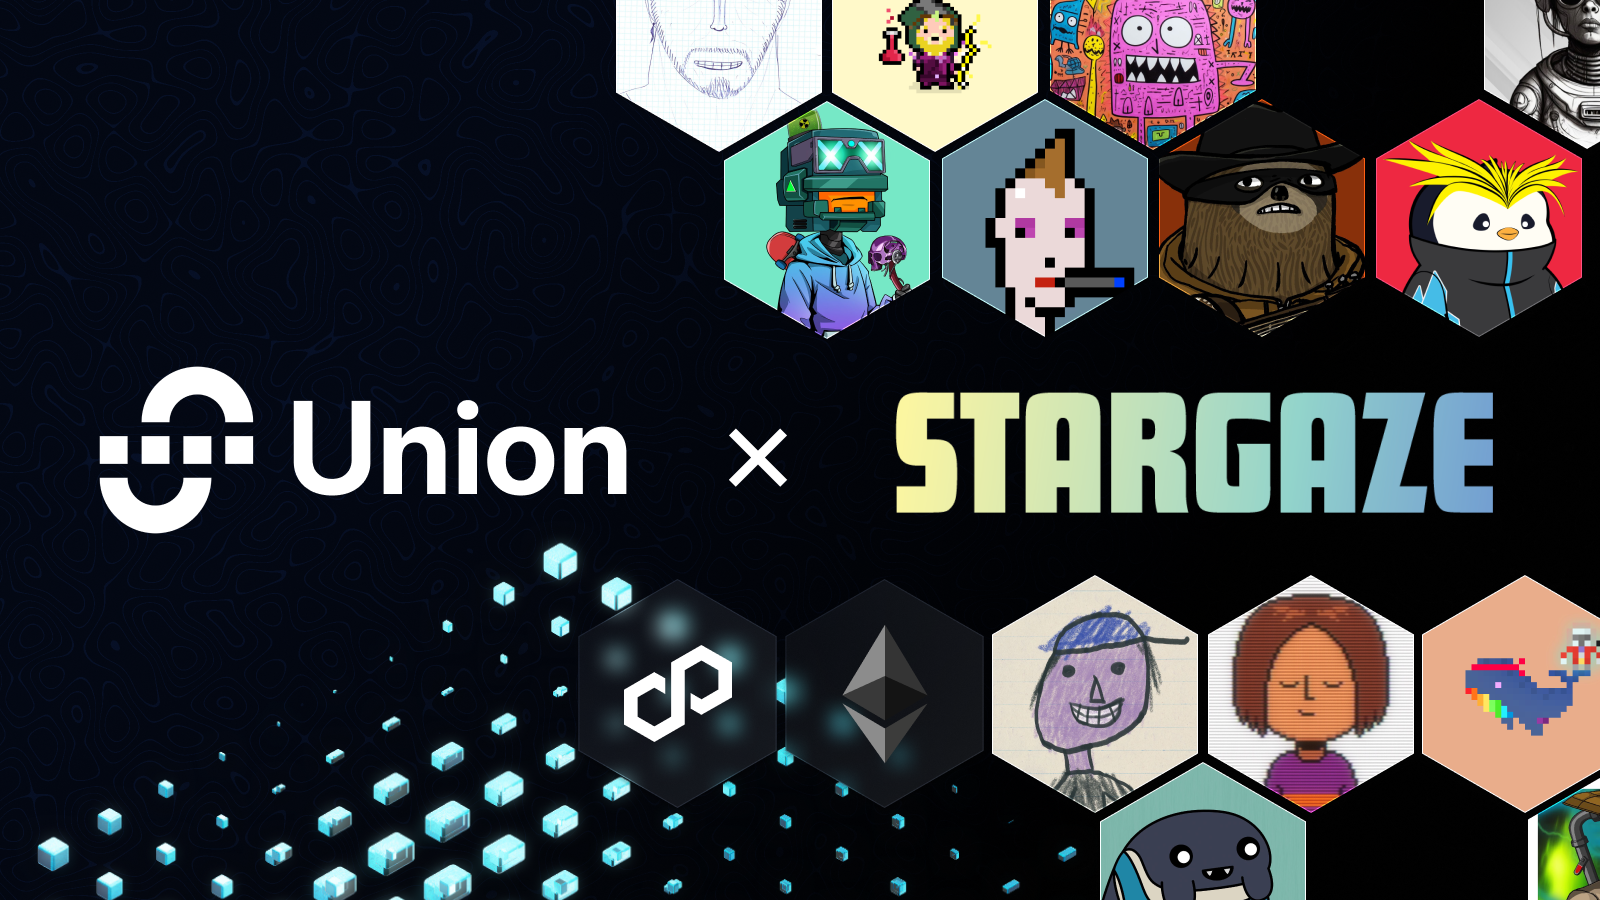 Union and Stargaze logos with various NFT avatars